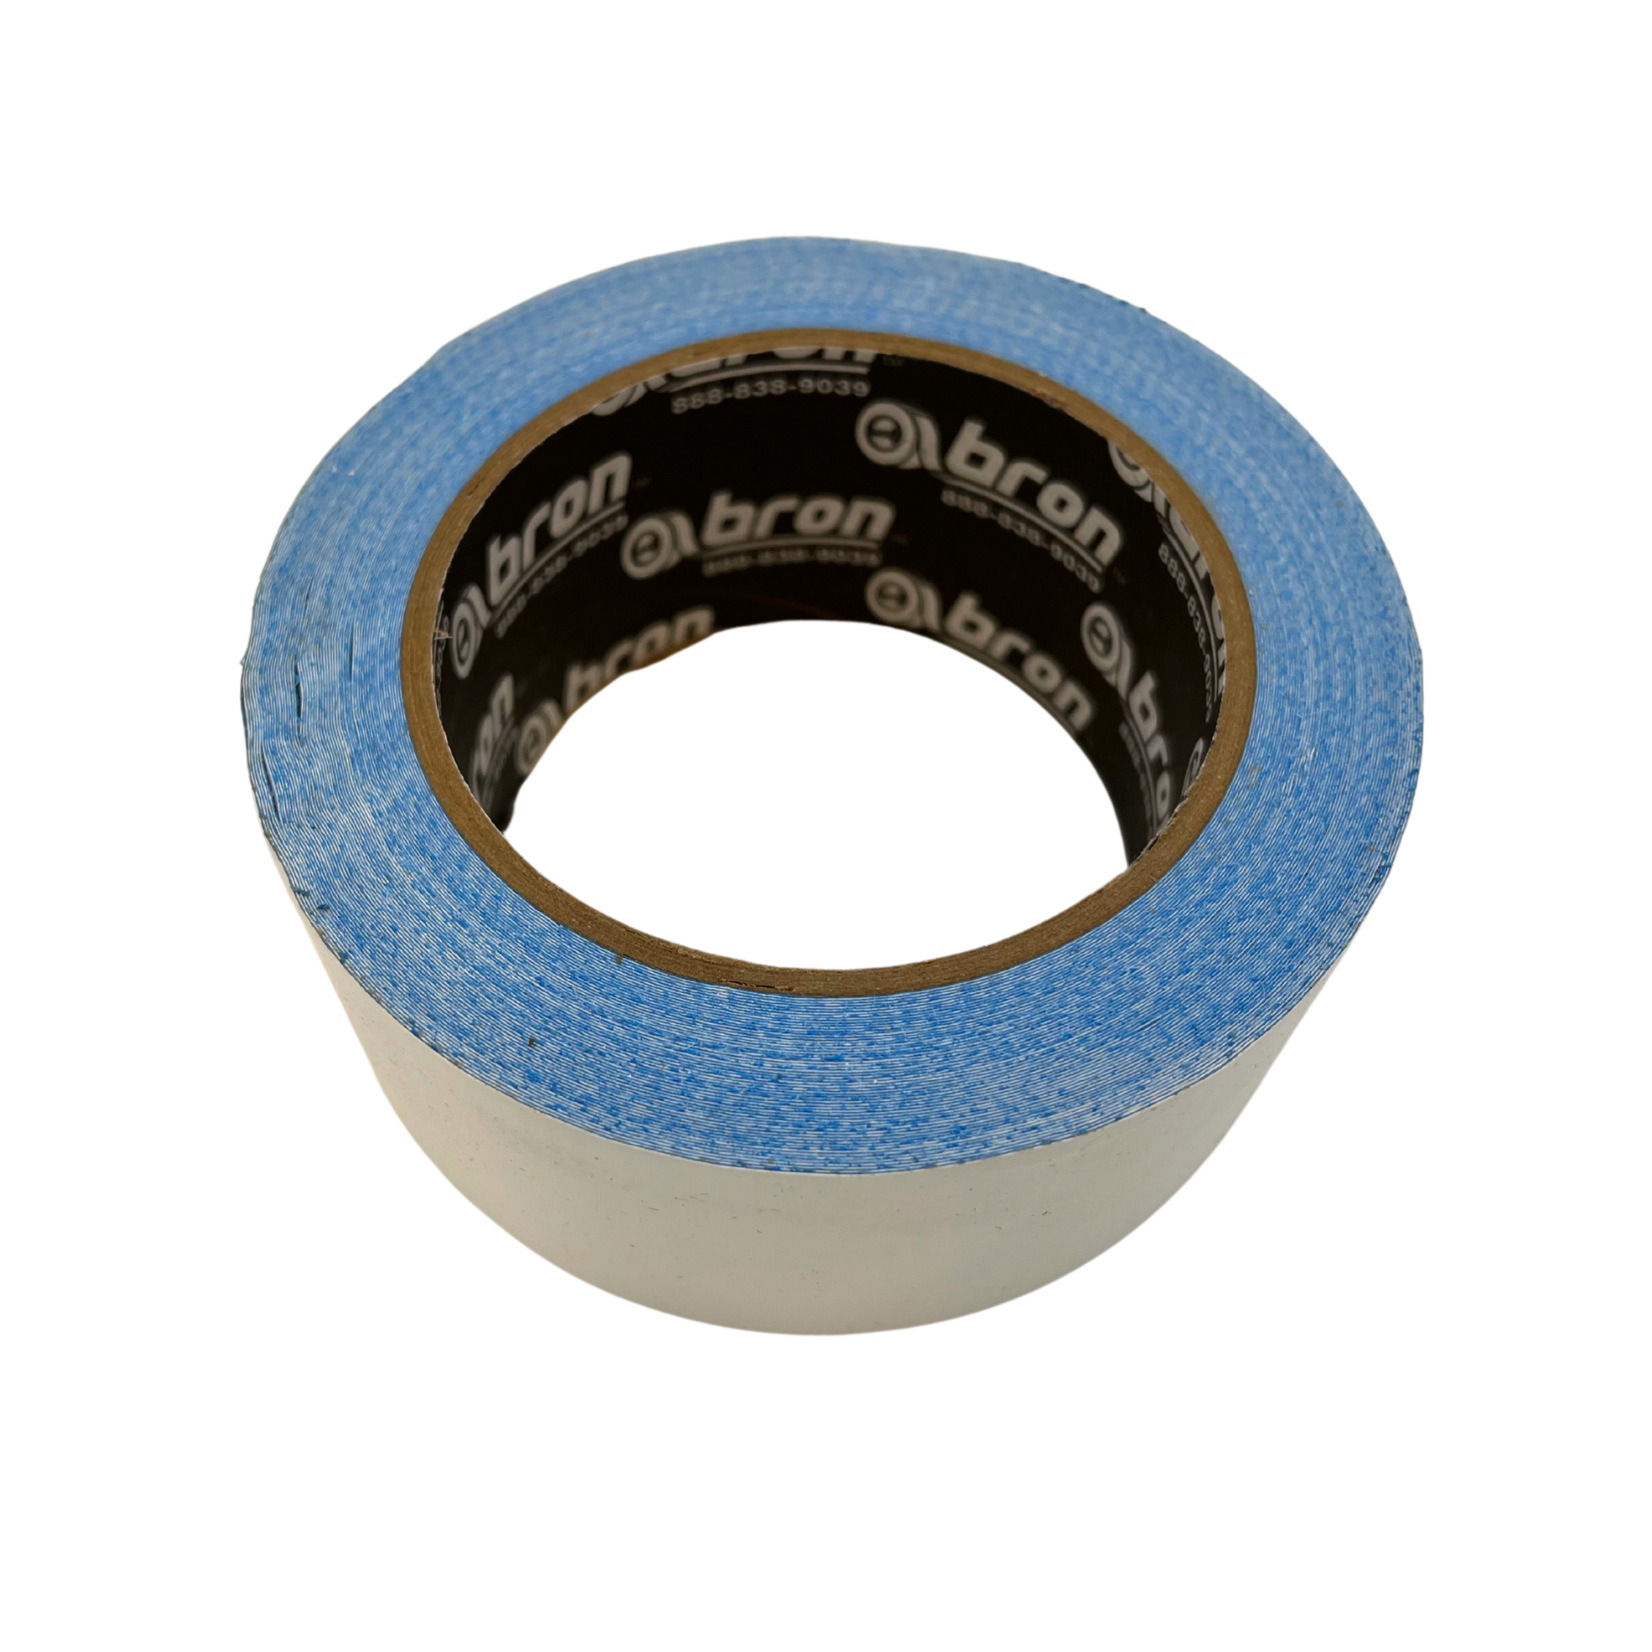 Bron MCD Double Coated Tape 48MM x 20yrds BT-1148